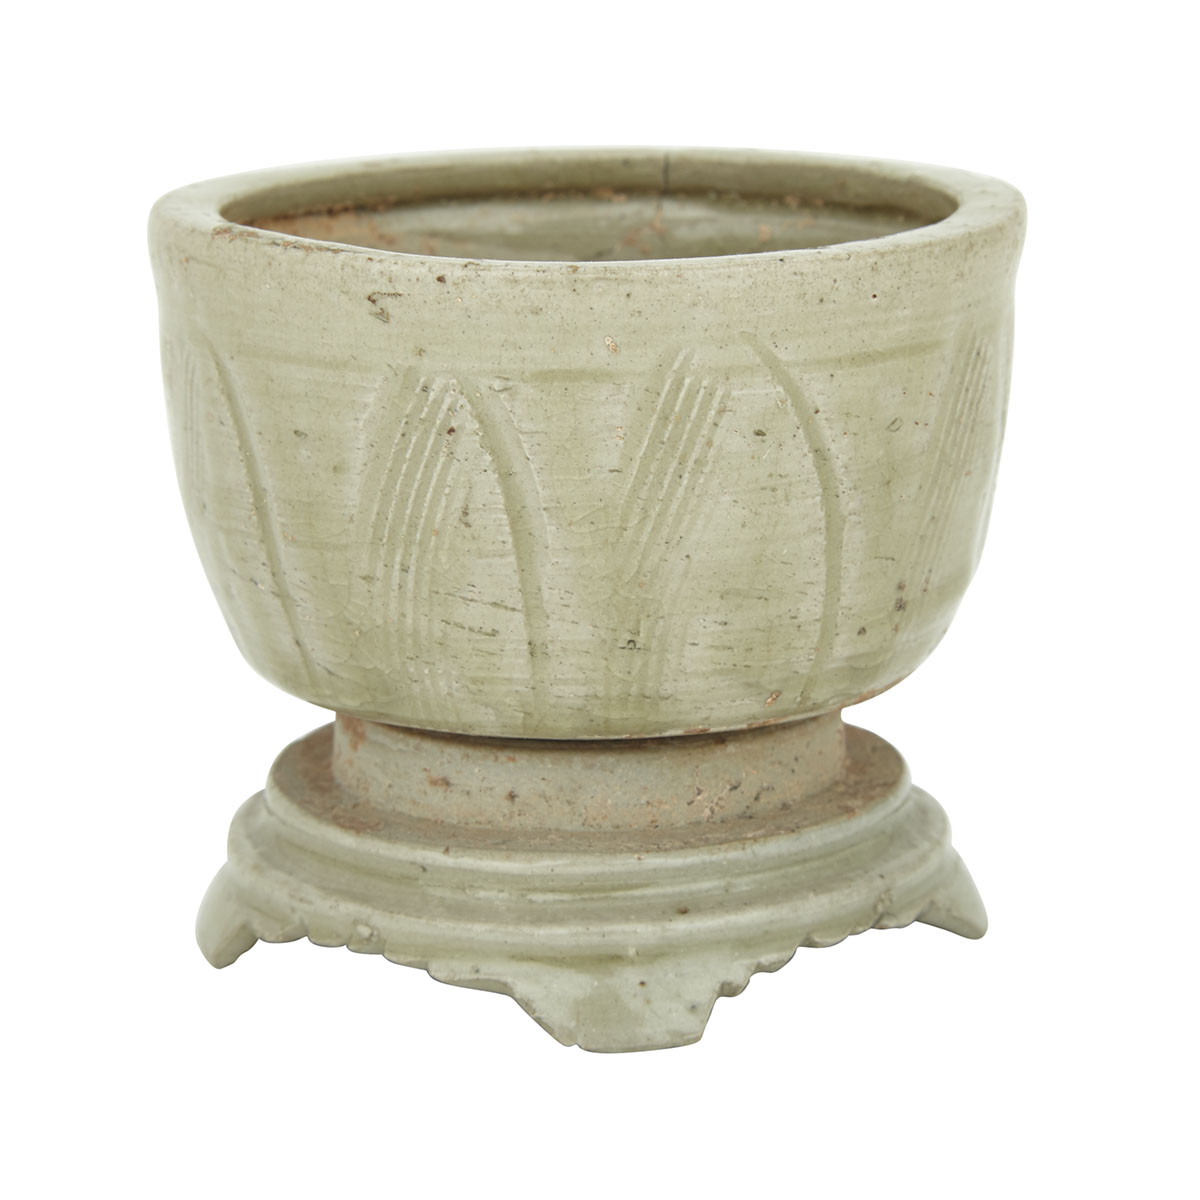 Yueyao Celadon Glazed Bowl and Stand, Song Dynasty (960-1279)